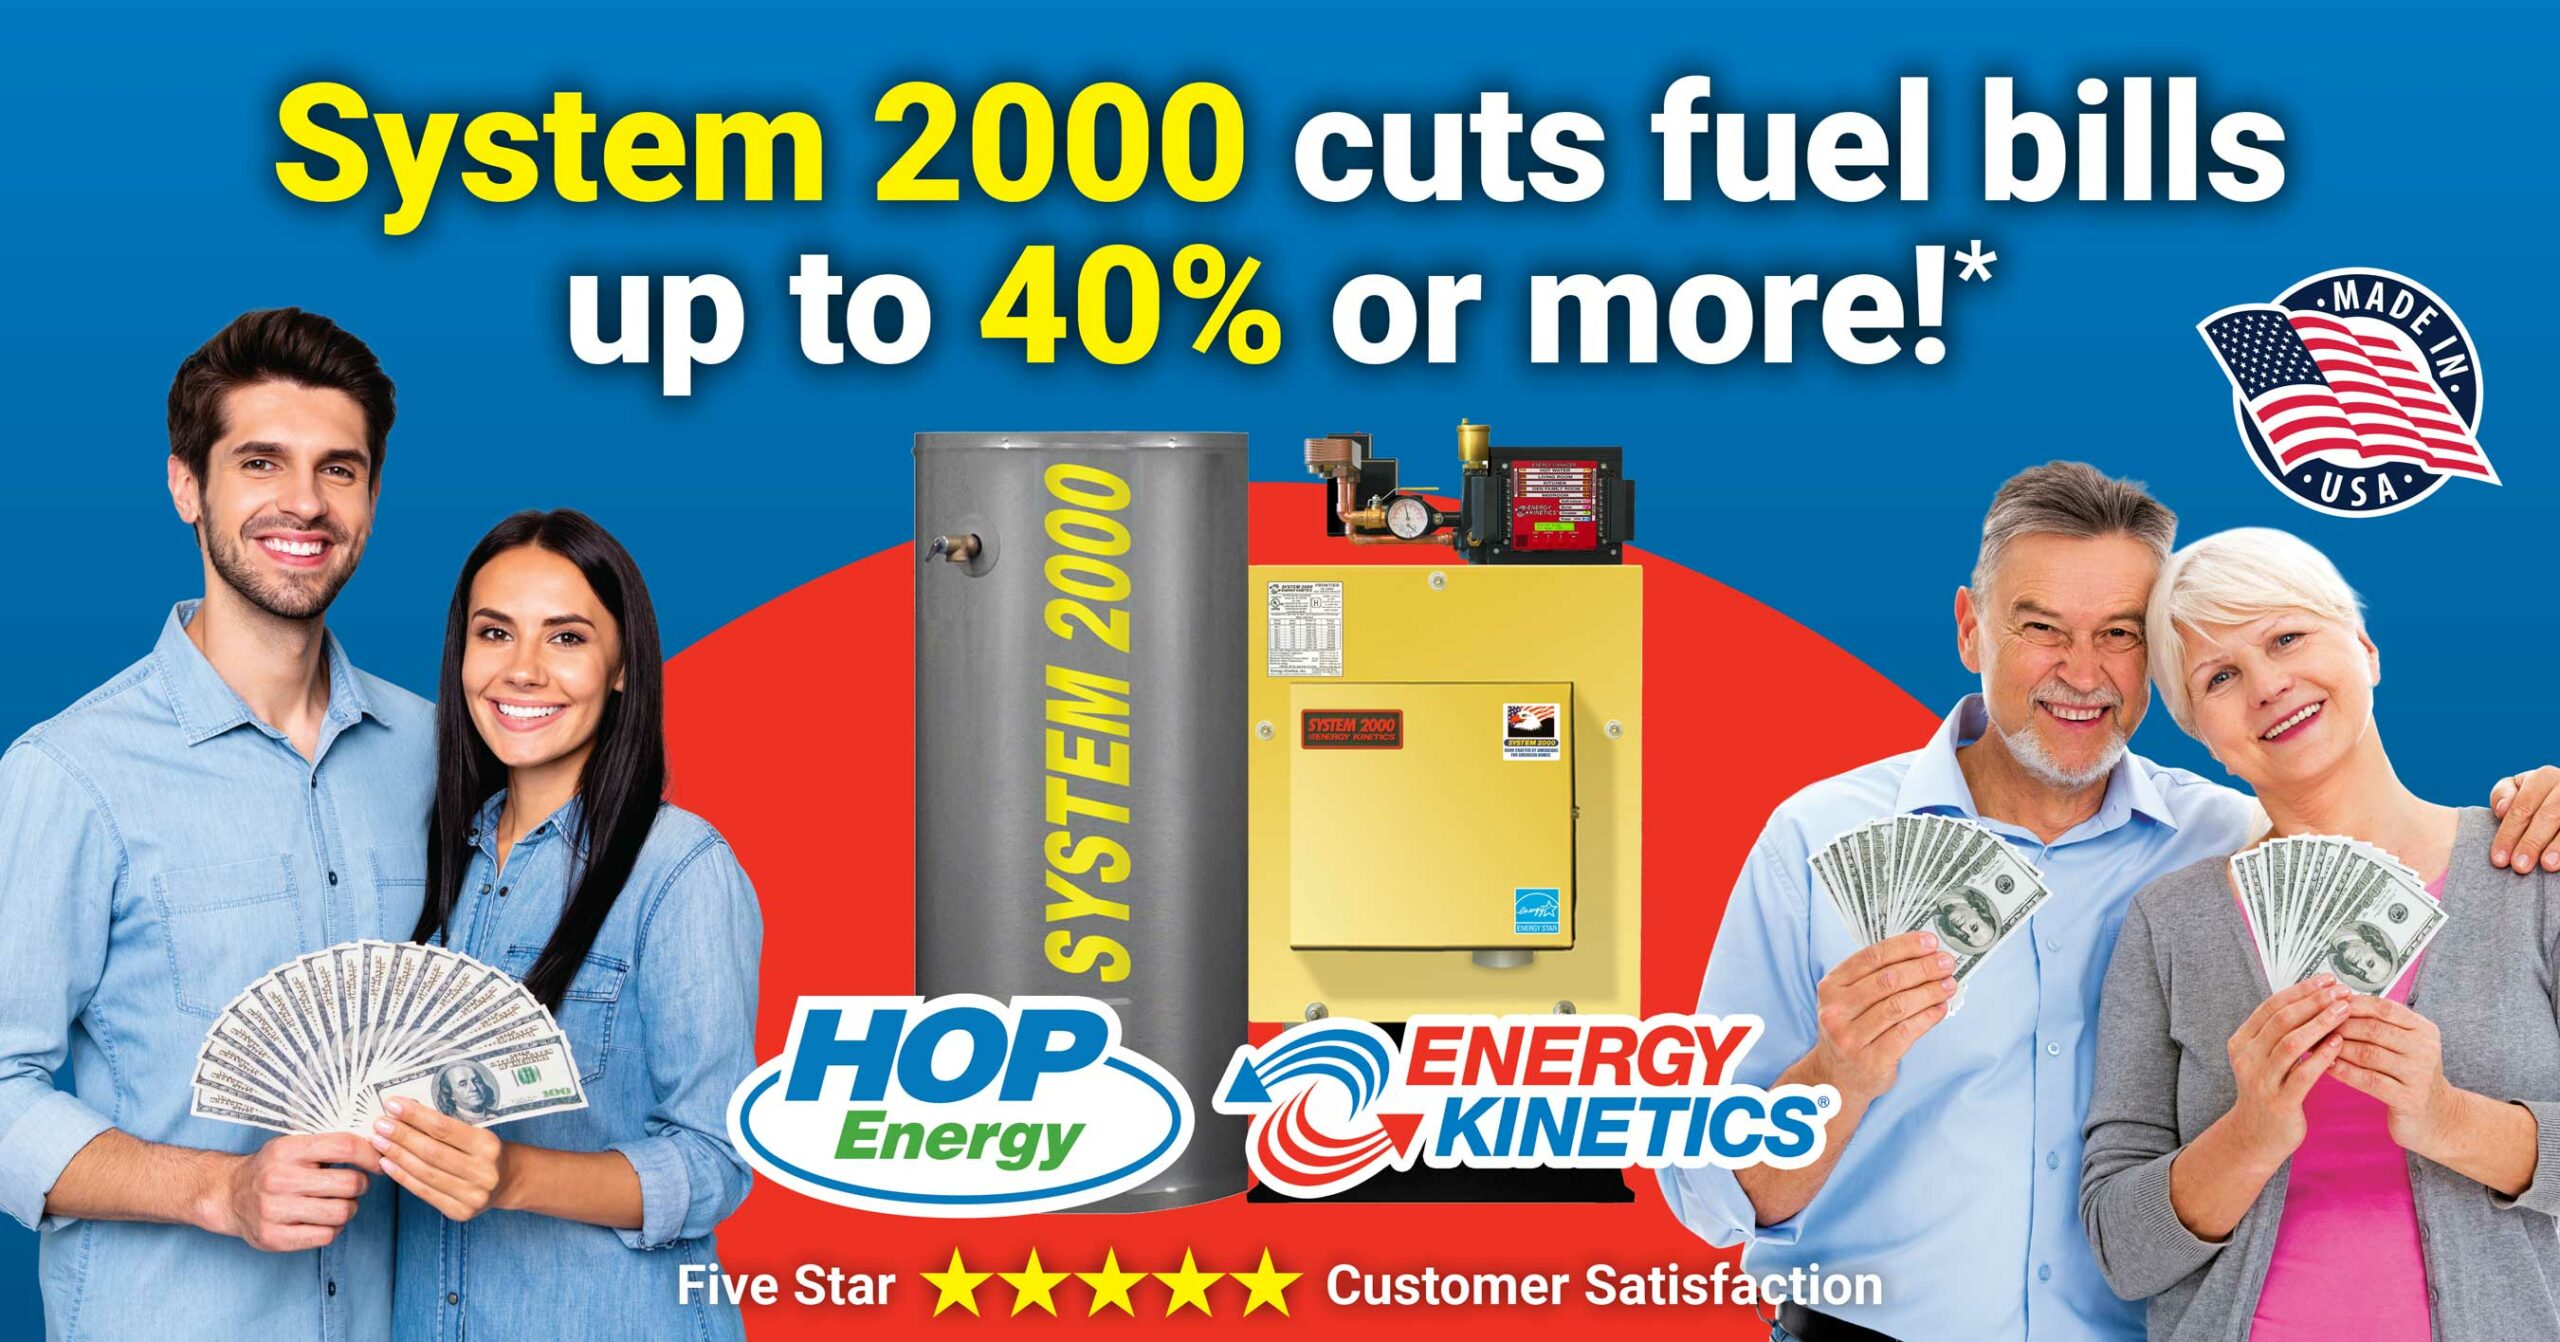 Energy Kinetics System 2000 heating oil boiler saves up to 40% on fuel bills